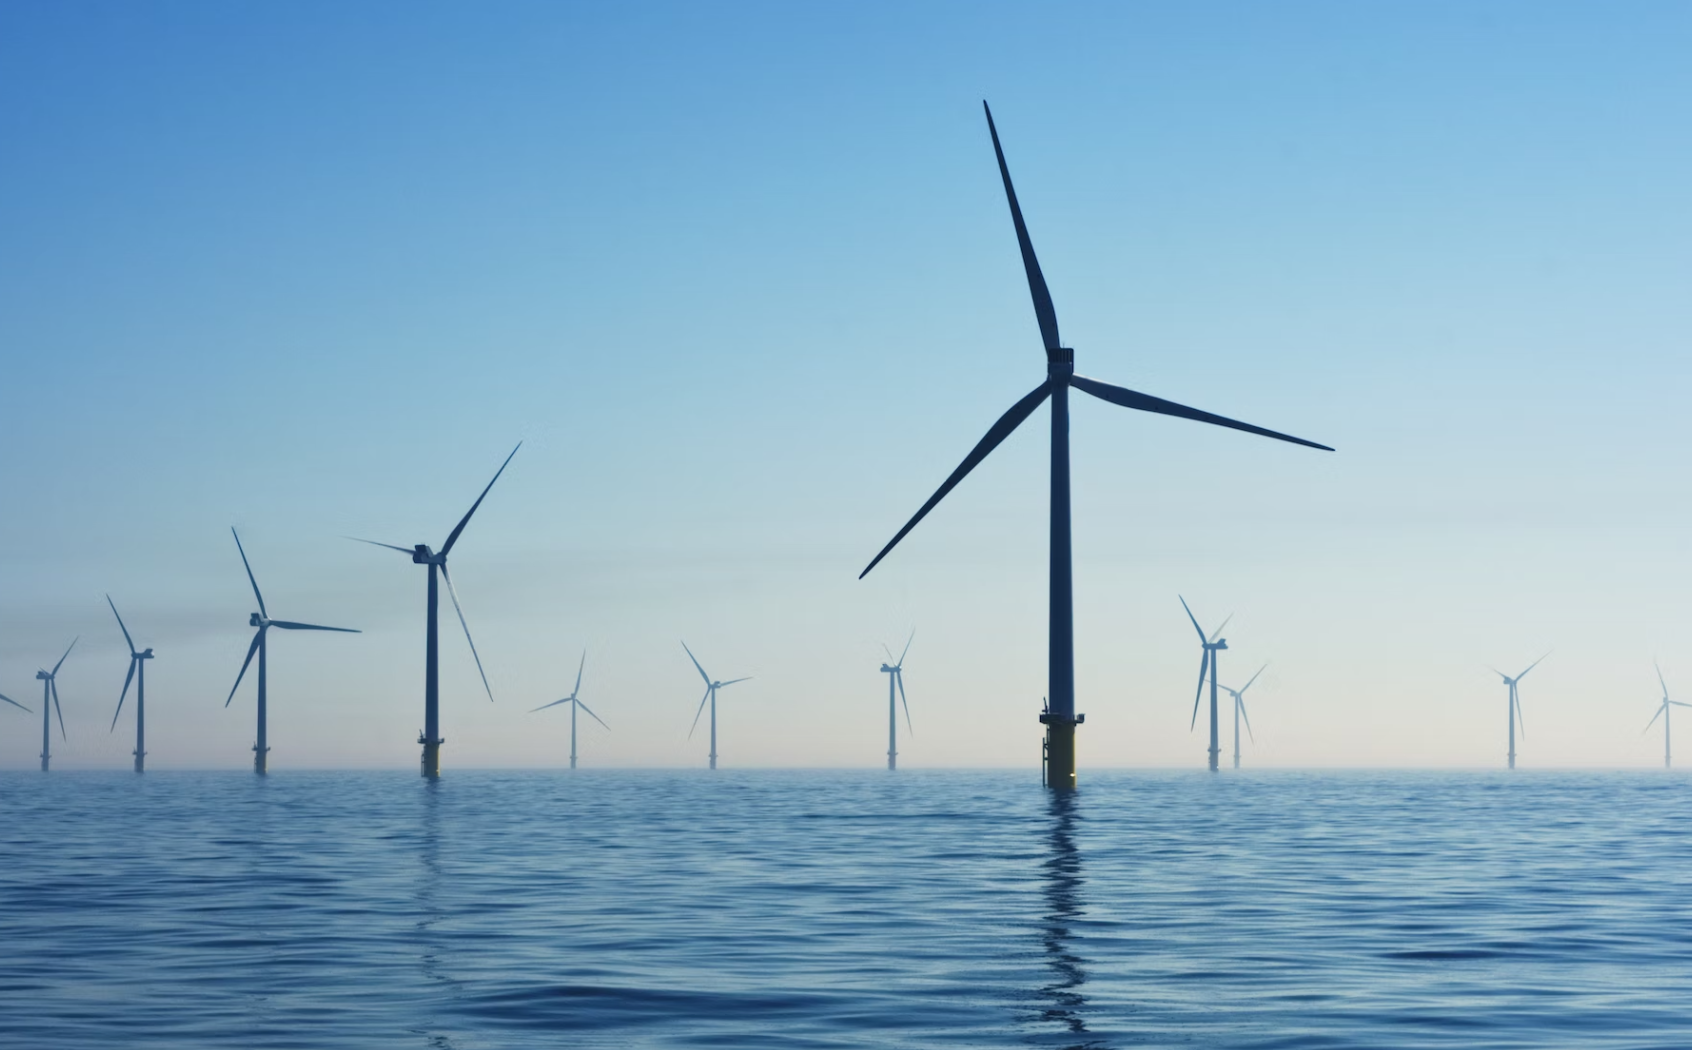 wind turbines in the blue sea with a blue sky background